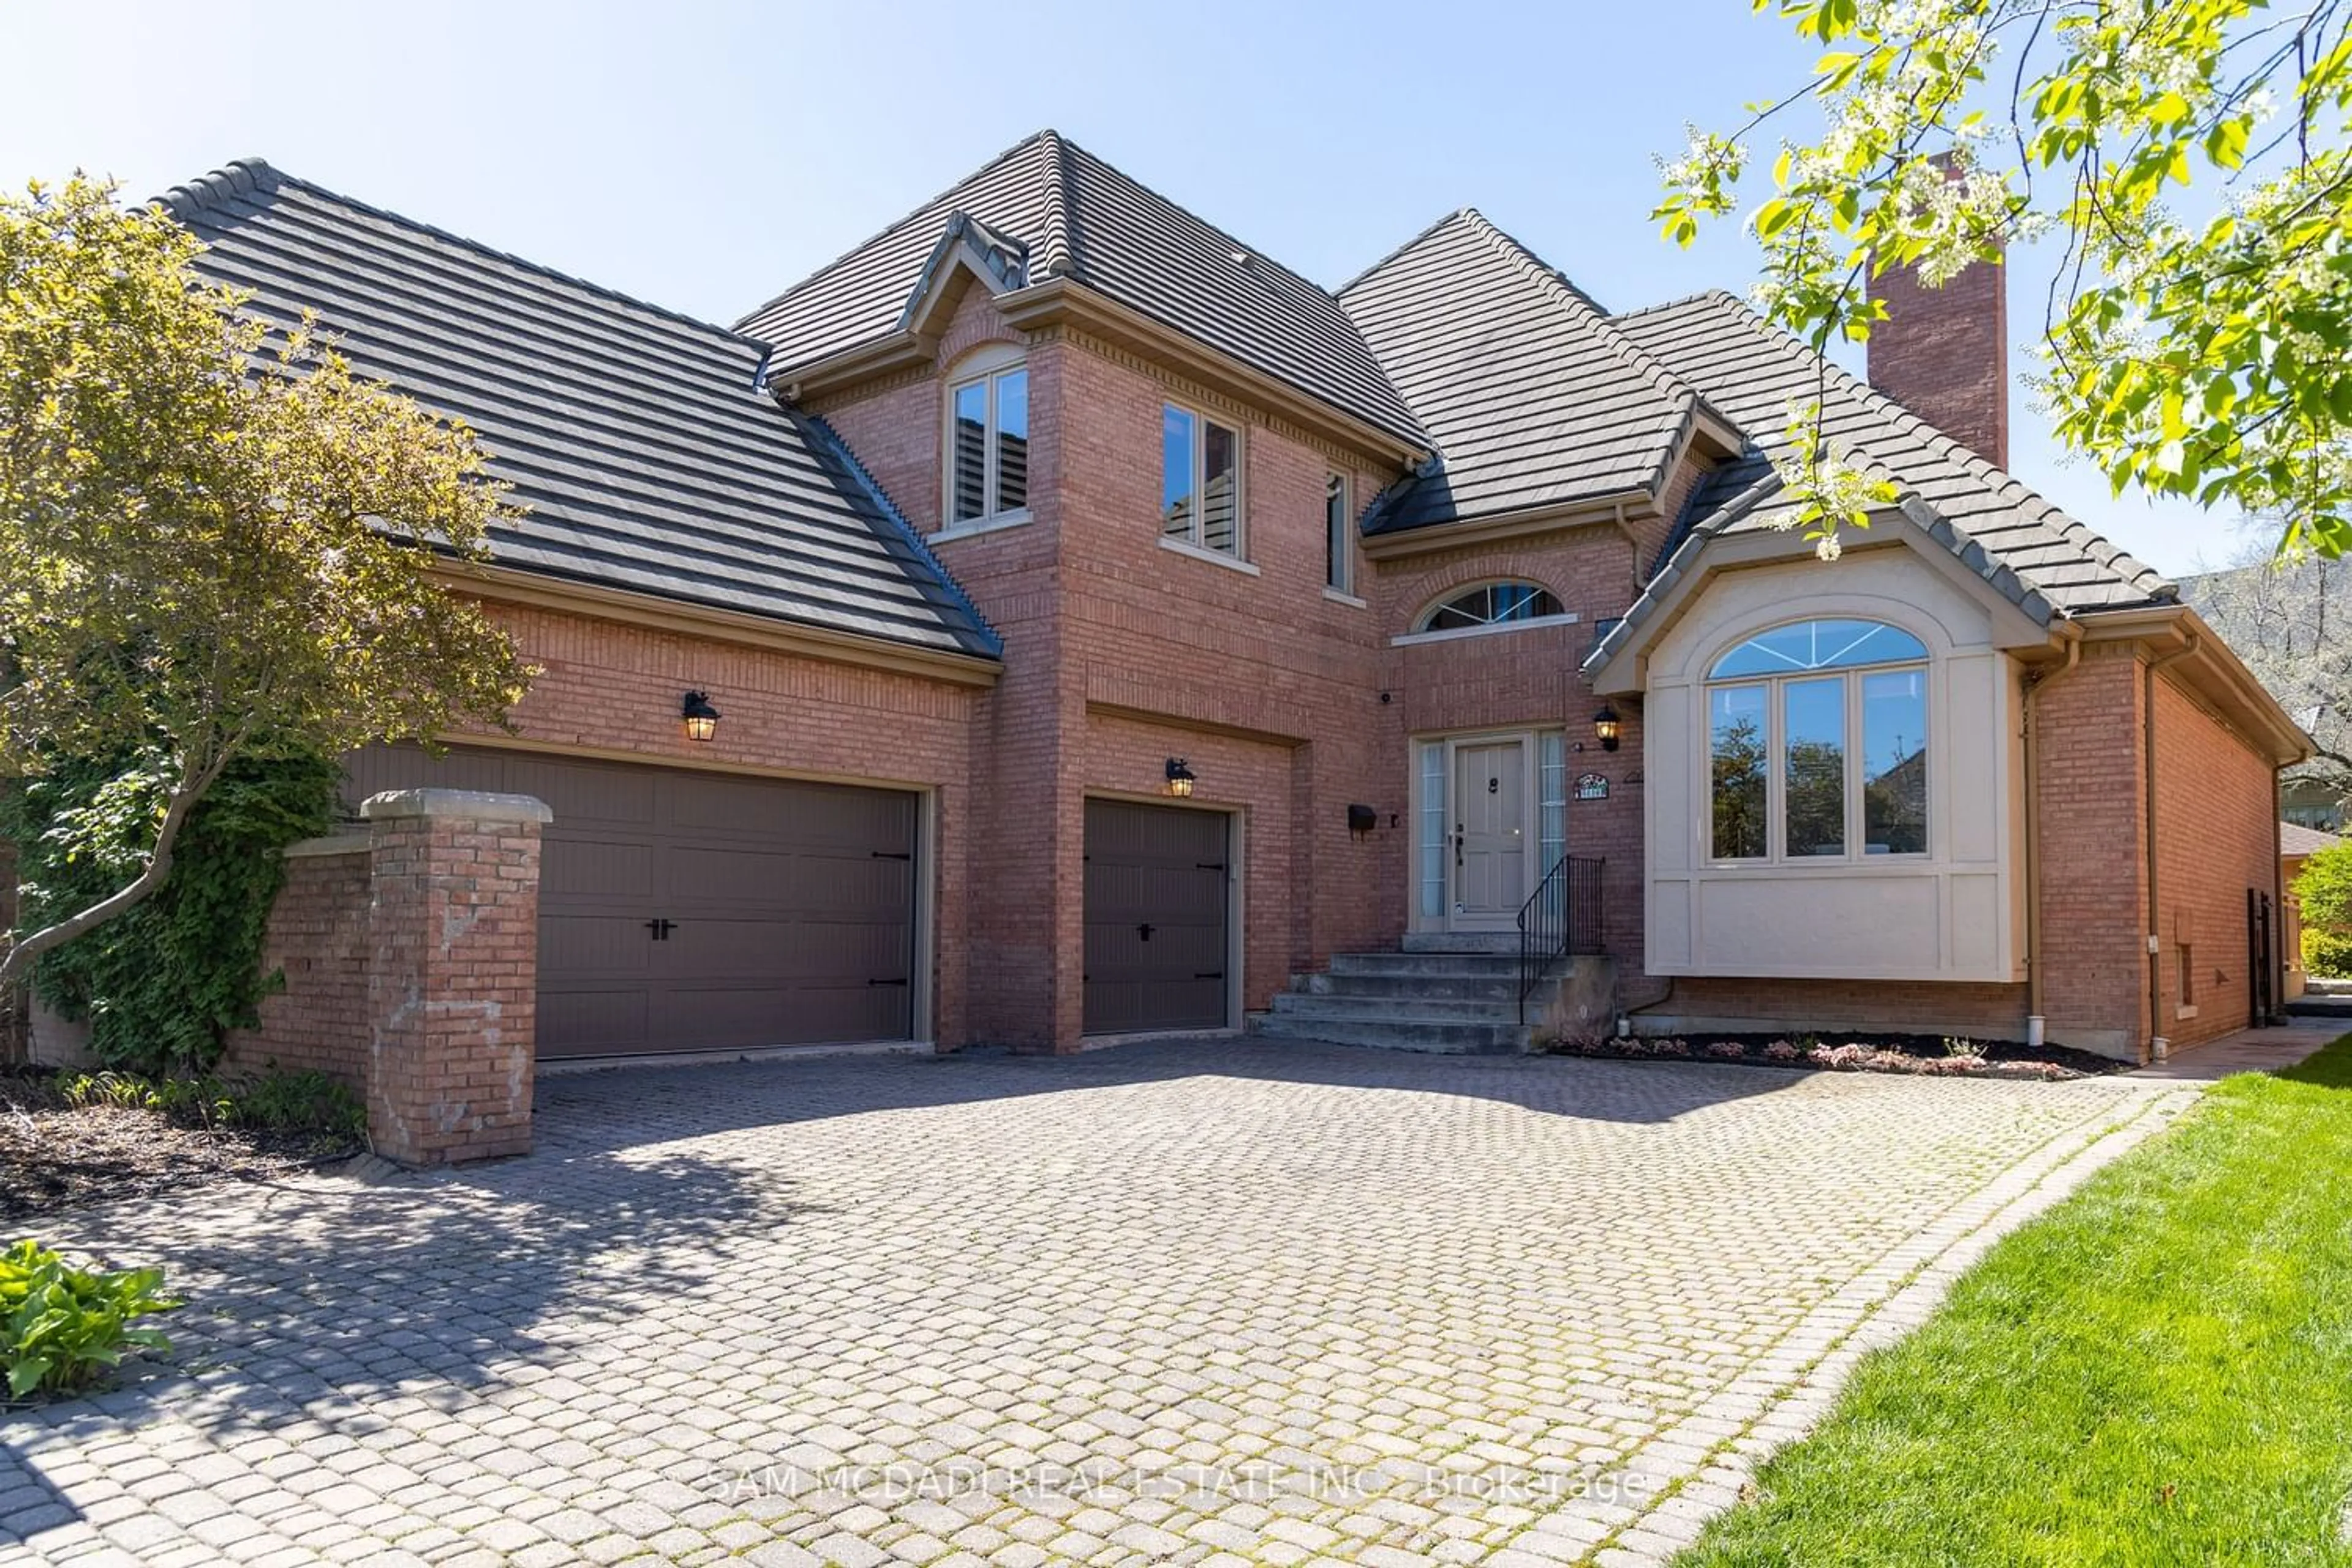 Home with brick exterior material for 5114 Forest Hill Dr, Mississauga Ontario L5M 5A3